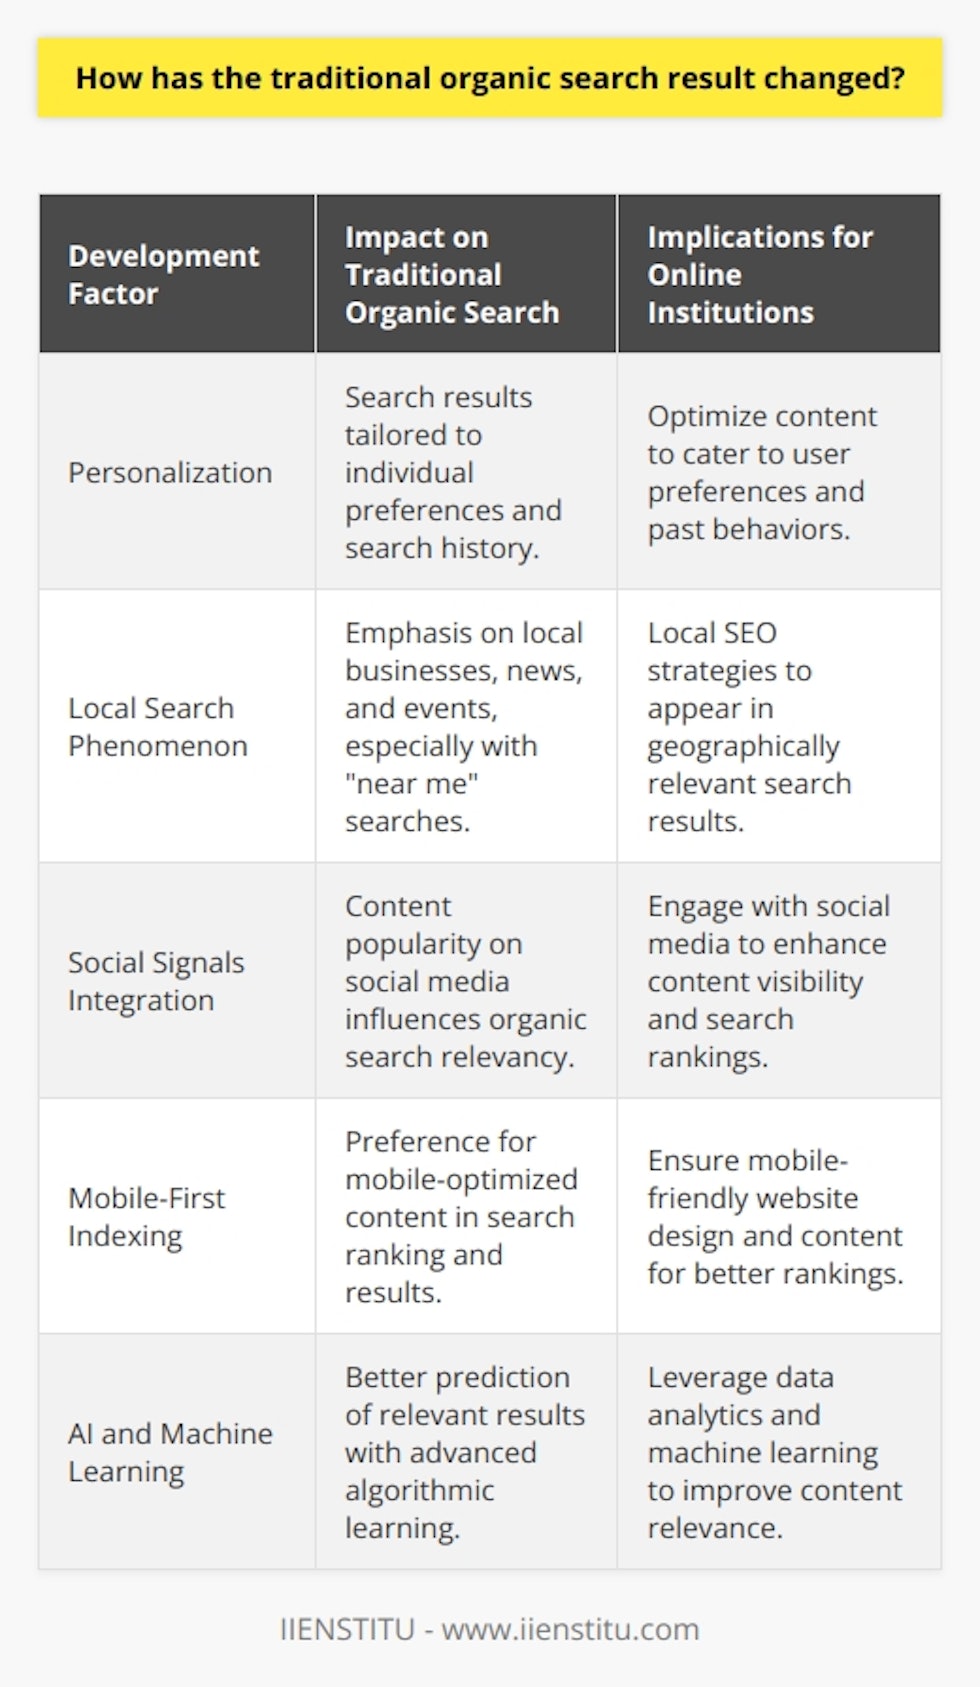 The landscape of traditional organic search results has undergone substantial evolution with the advancement of search engine algorithms and the diversification of user behavior. This evolution has been marked by several significant developments that search engines, especially Google, have integrated to enhance the quality and relevance of the content they serve to their users.Personalization has become a cornerstone of modern search results. Traditional organic search listings, which were once uniform across different users, have now become highly personalized based on an individual’s search history, online behavior, and preferences. AI and machine learning have enabled search engines to learn and predict what specific users might find relevant, often showing results that have been adapted to match these inferred interests.The local search phenomenon has particularly had a profound impact on traditional search results. Rather than providing generic results that may apply to a wider audience, search engines now place a greater emphasis on presenting local businesses, news, events, and other content that is geographically pertinent to the user. The advent of near me searches has further pushed the fine-tuning of geo-targeted responses, ensuring that the traditional one-size-fits-all organic result is now more community-focused and relevant to one's immediate surroundings.Integration of social signals has introduced an interconnectedness between organic search and social media. Search engines increasingly regard the social media footprint – shares, likes, and mentions – as indicators of content relevancy and popularity. Consequently, what is trending on social platforms can influence and sometimes appear in organic search results, weaving a tapestry of social validation into the traditional organic search framework.Furthermore, the proliferation of mobile device usage has reshaped the structure and presentation of organic search results. Mobile-first indexing, where Google predominantly uses the mobile version of the content for indexing and ranking, has led to the prioritization of mobile-optimized sites in search results. The surge of on-the-go searches via smartphones has reiterated the need for quick, accessible, and succinct information that fits the small-screen experience.As traditional organic search results have been reshaped by these myriad factors, institutions offering online learning opportunities like IIENSTITU have also adapted to these changes. These institutions work to optimize their online visibility by aligning with the new paradigms of personalization, local search, social media integration, and mobile optimization to effectively reach potential students.In essence, the cultural fabric of search engines has been painted anew over recent years. Traditional organic search results are no longer static but are dynamic, shaped by the real-time preferences, locations, and social interactions of users as well as their chosen browsing devices, making every search a unique, more relevant experience.